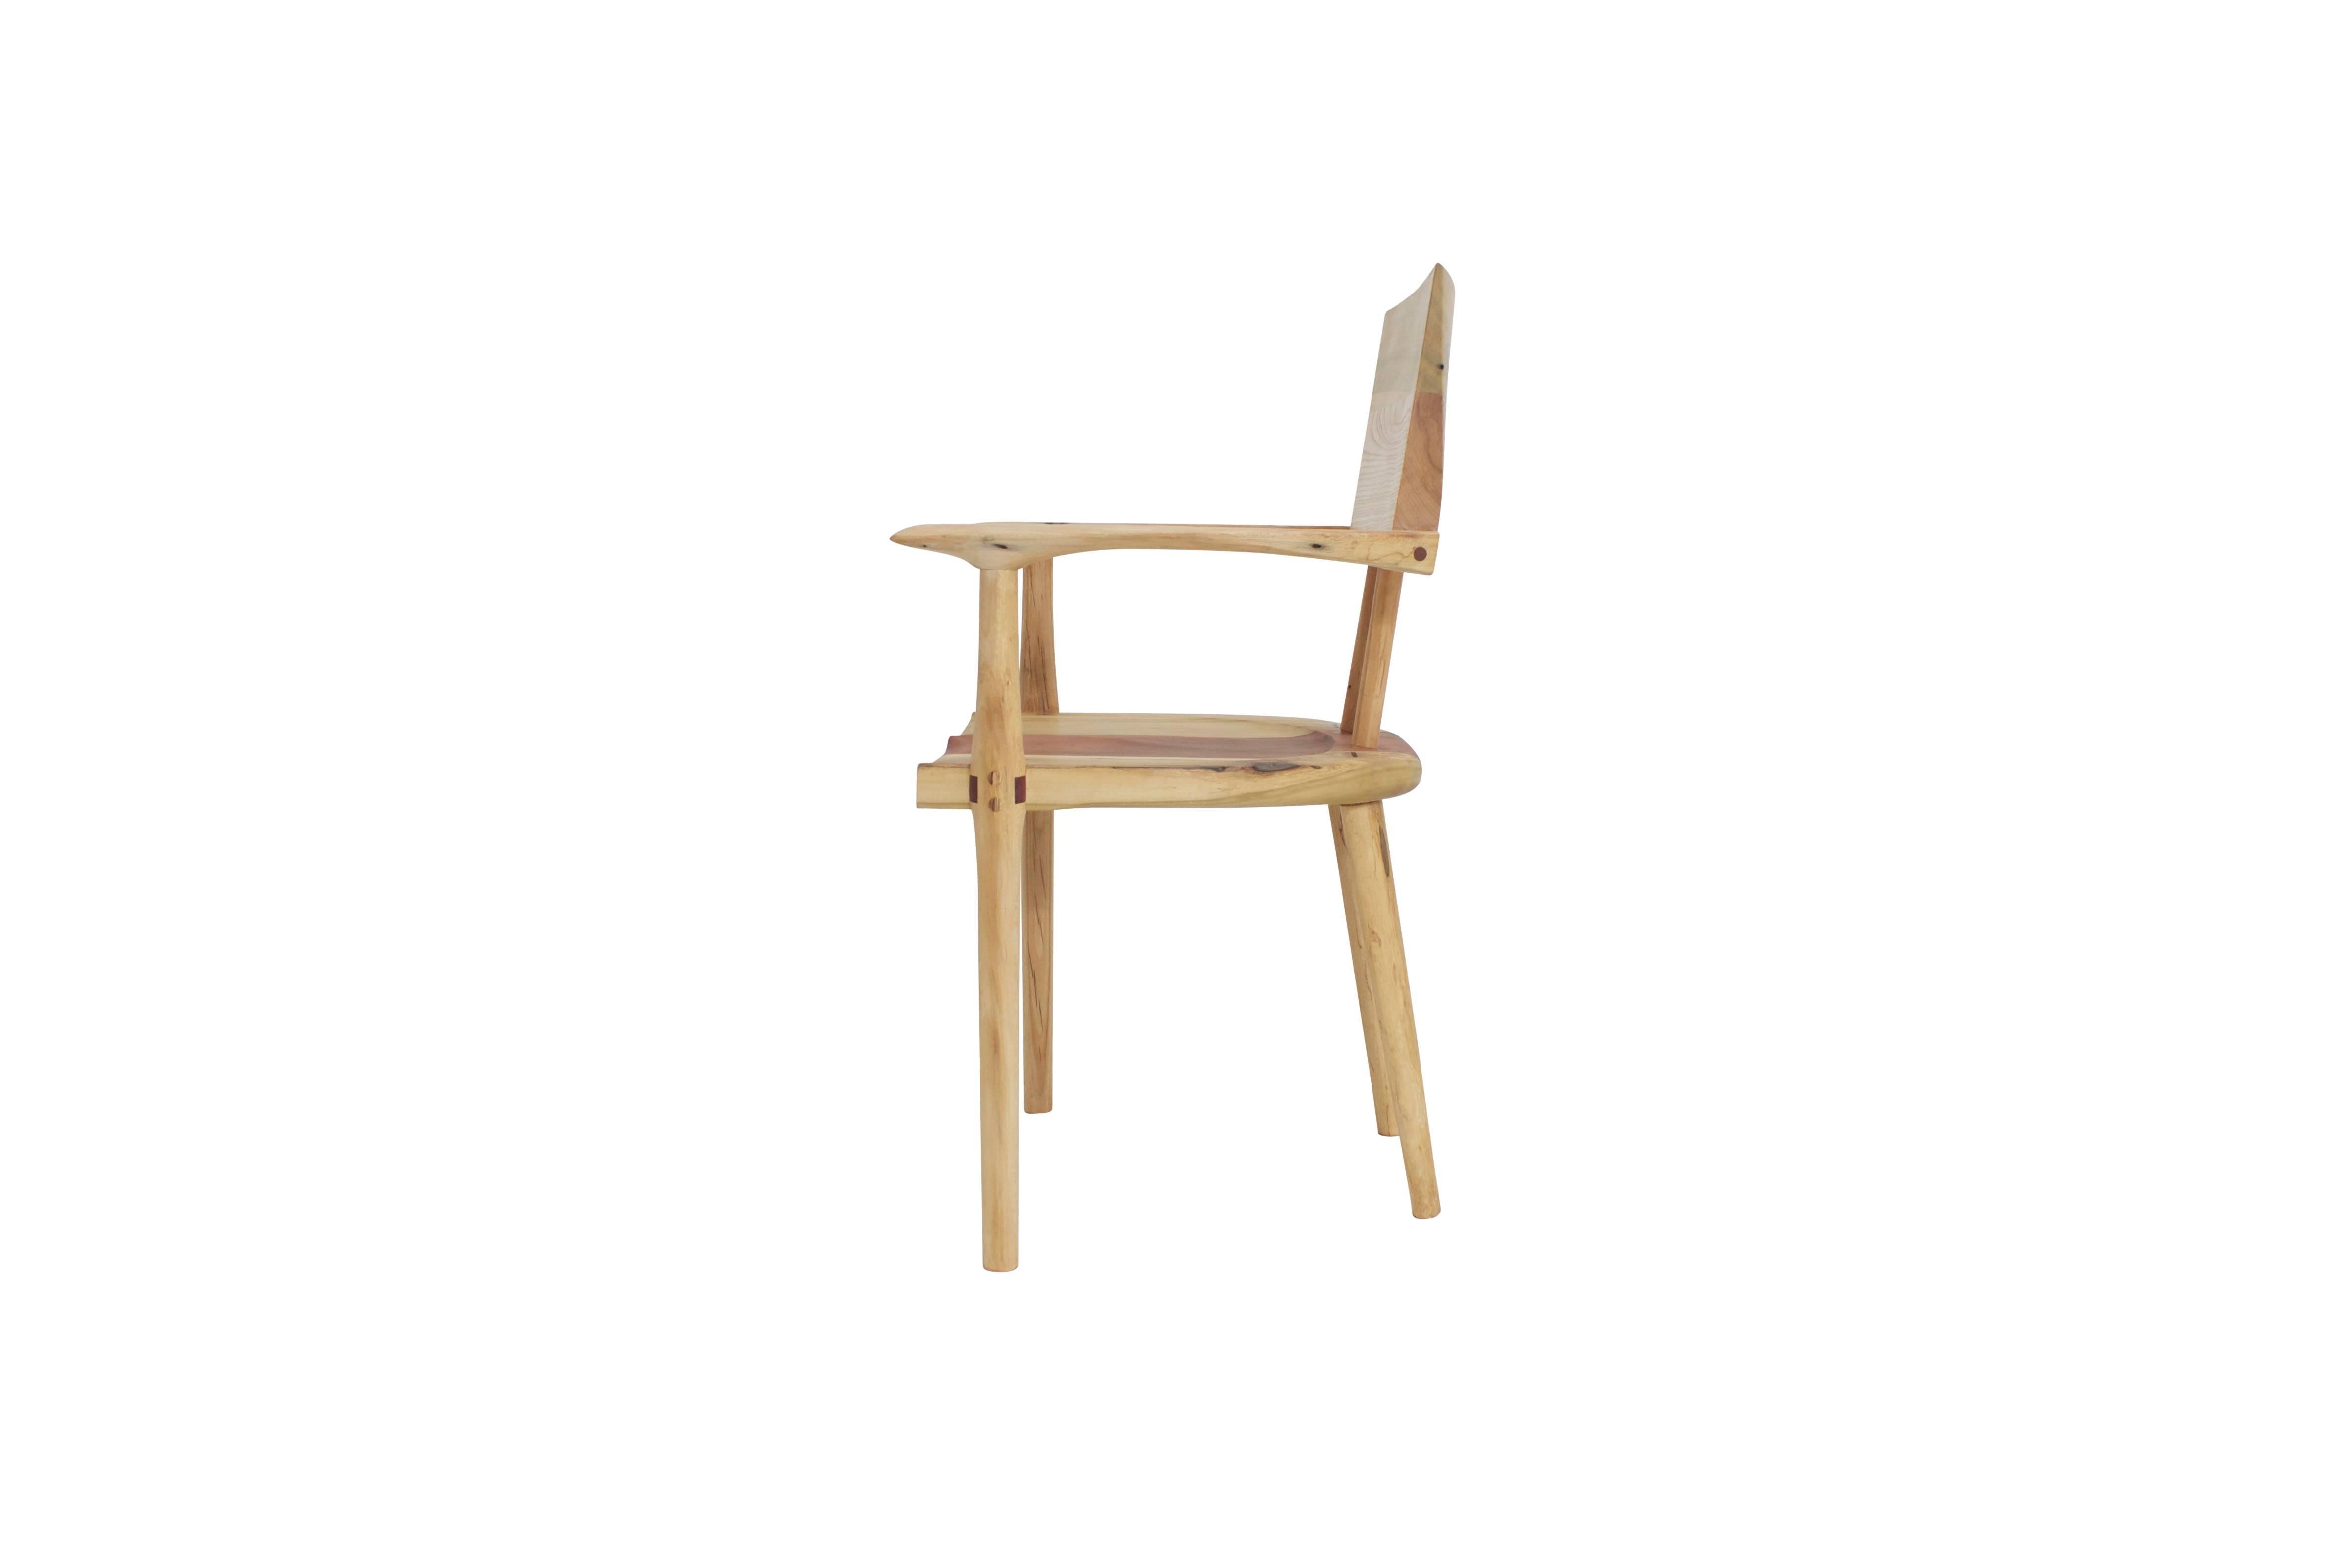 The Chubby chair evokes a feeling of solidity, weight and forward movement. Ergonomically-friendly features including hand-scooped seat grooves, hand shaped arms and back rest. The legs are hand turned and utilize thru-tenon joinery for superior